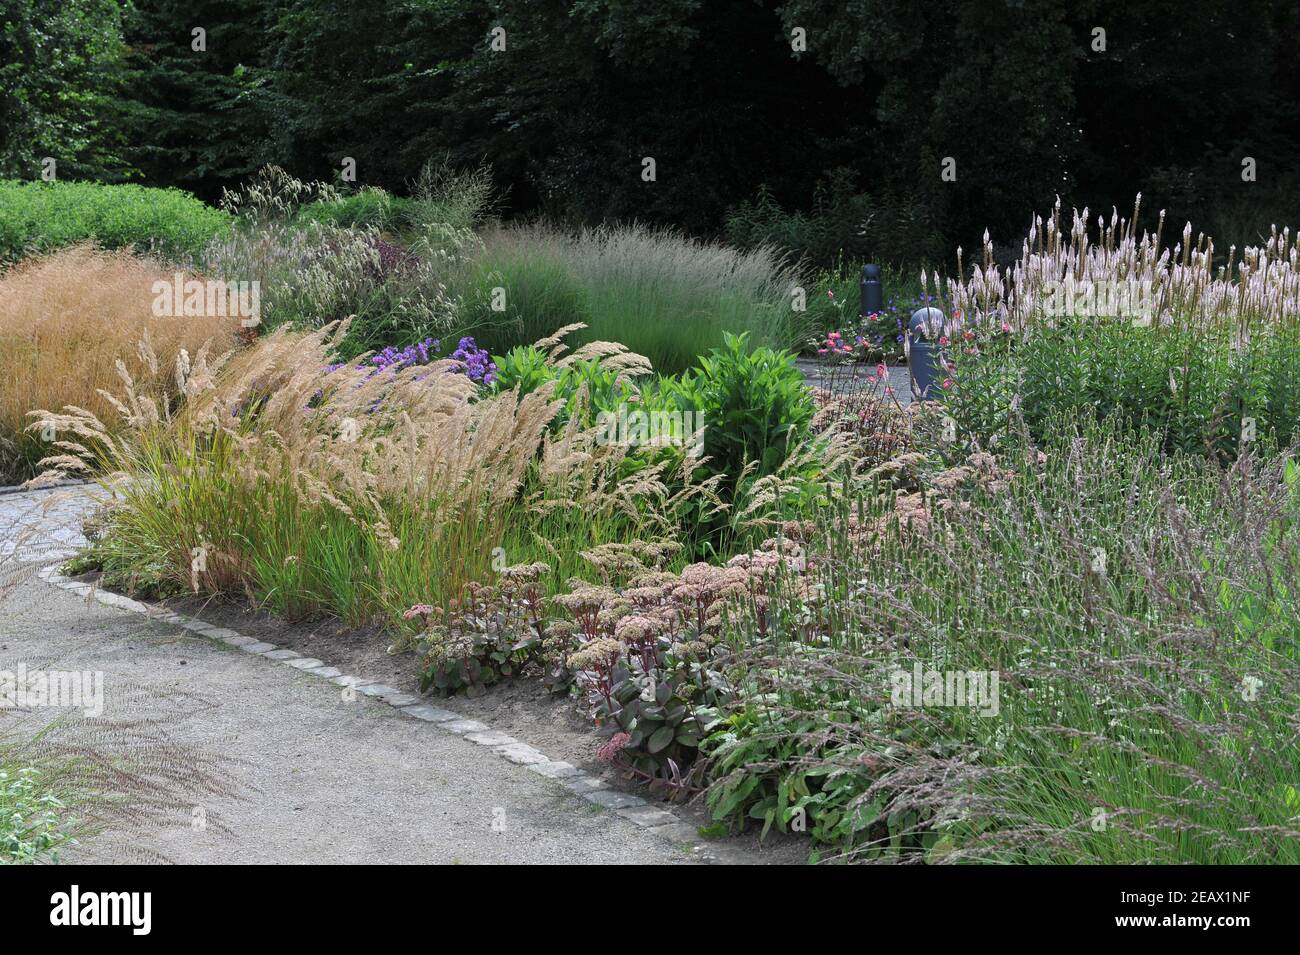 HAMM, GERMANY - 15 AUGUST 2015: Planting in perennial meadow style designed by Piet Oudolf in the Garden Art garden in the public park Maximilianpark Stock Photo